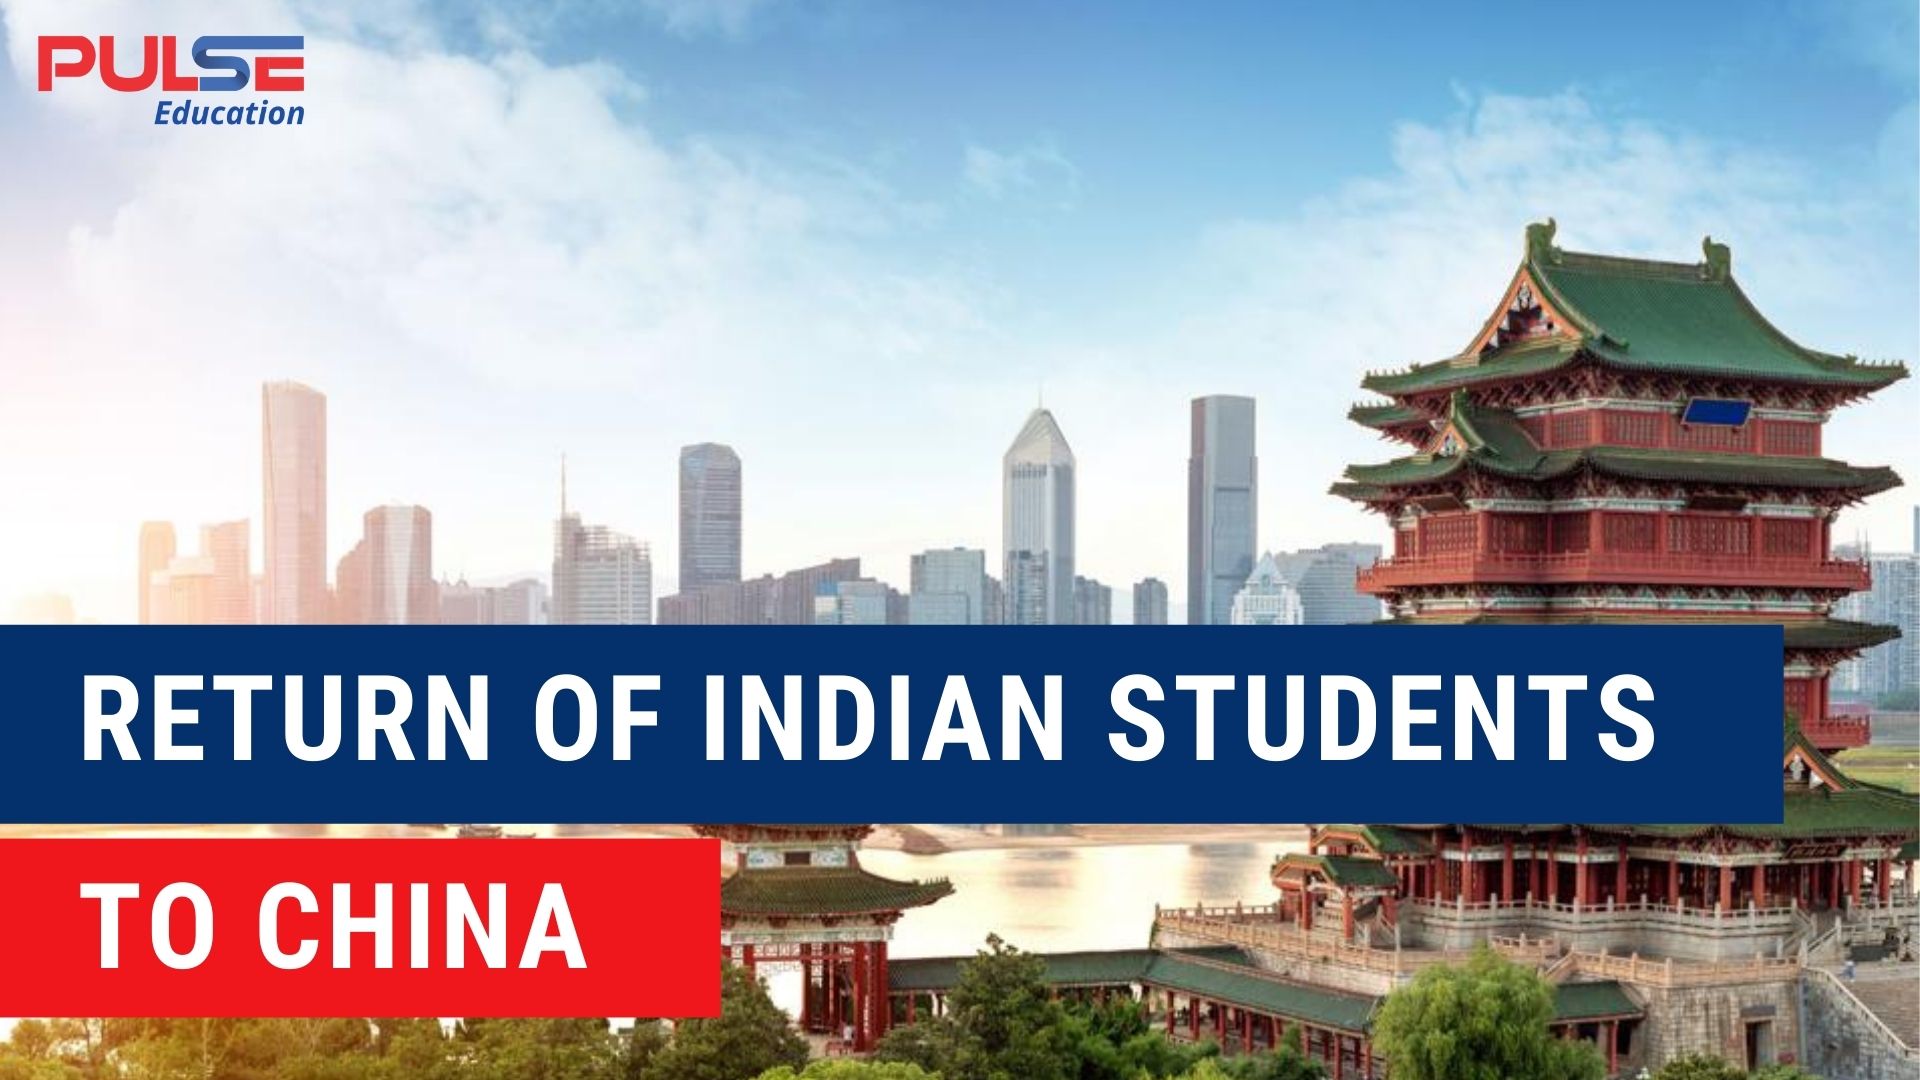 RETURN OF INDIAN STUDENTS TO CHINA